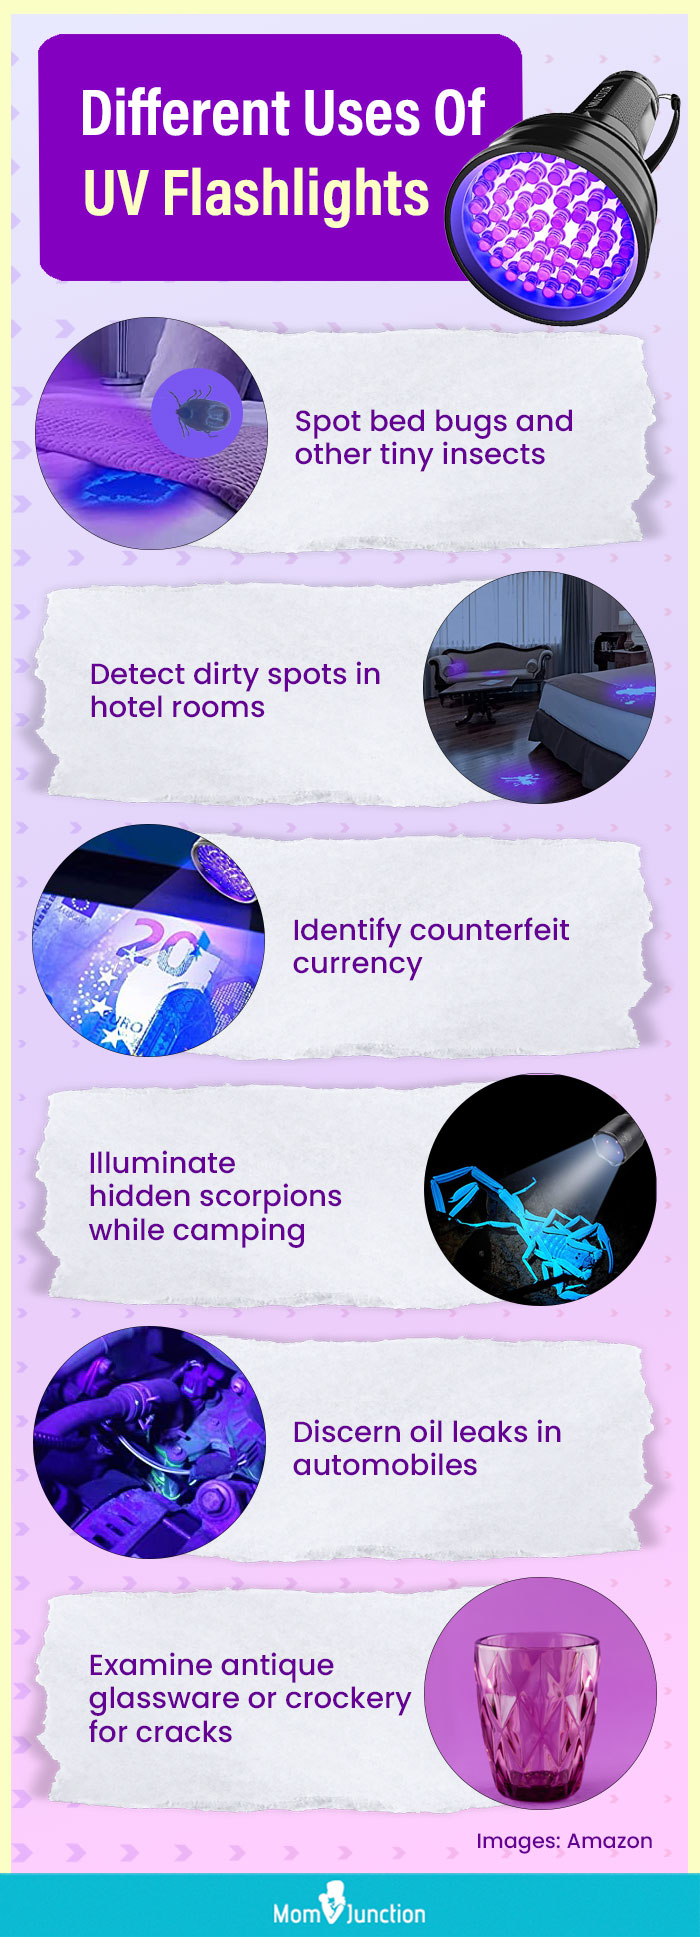 Different Uses Of UV Flashlights(infographic)